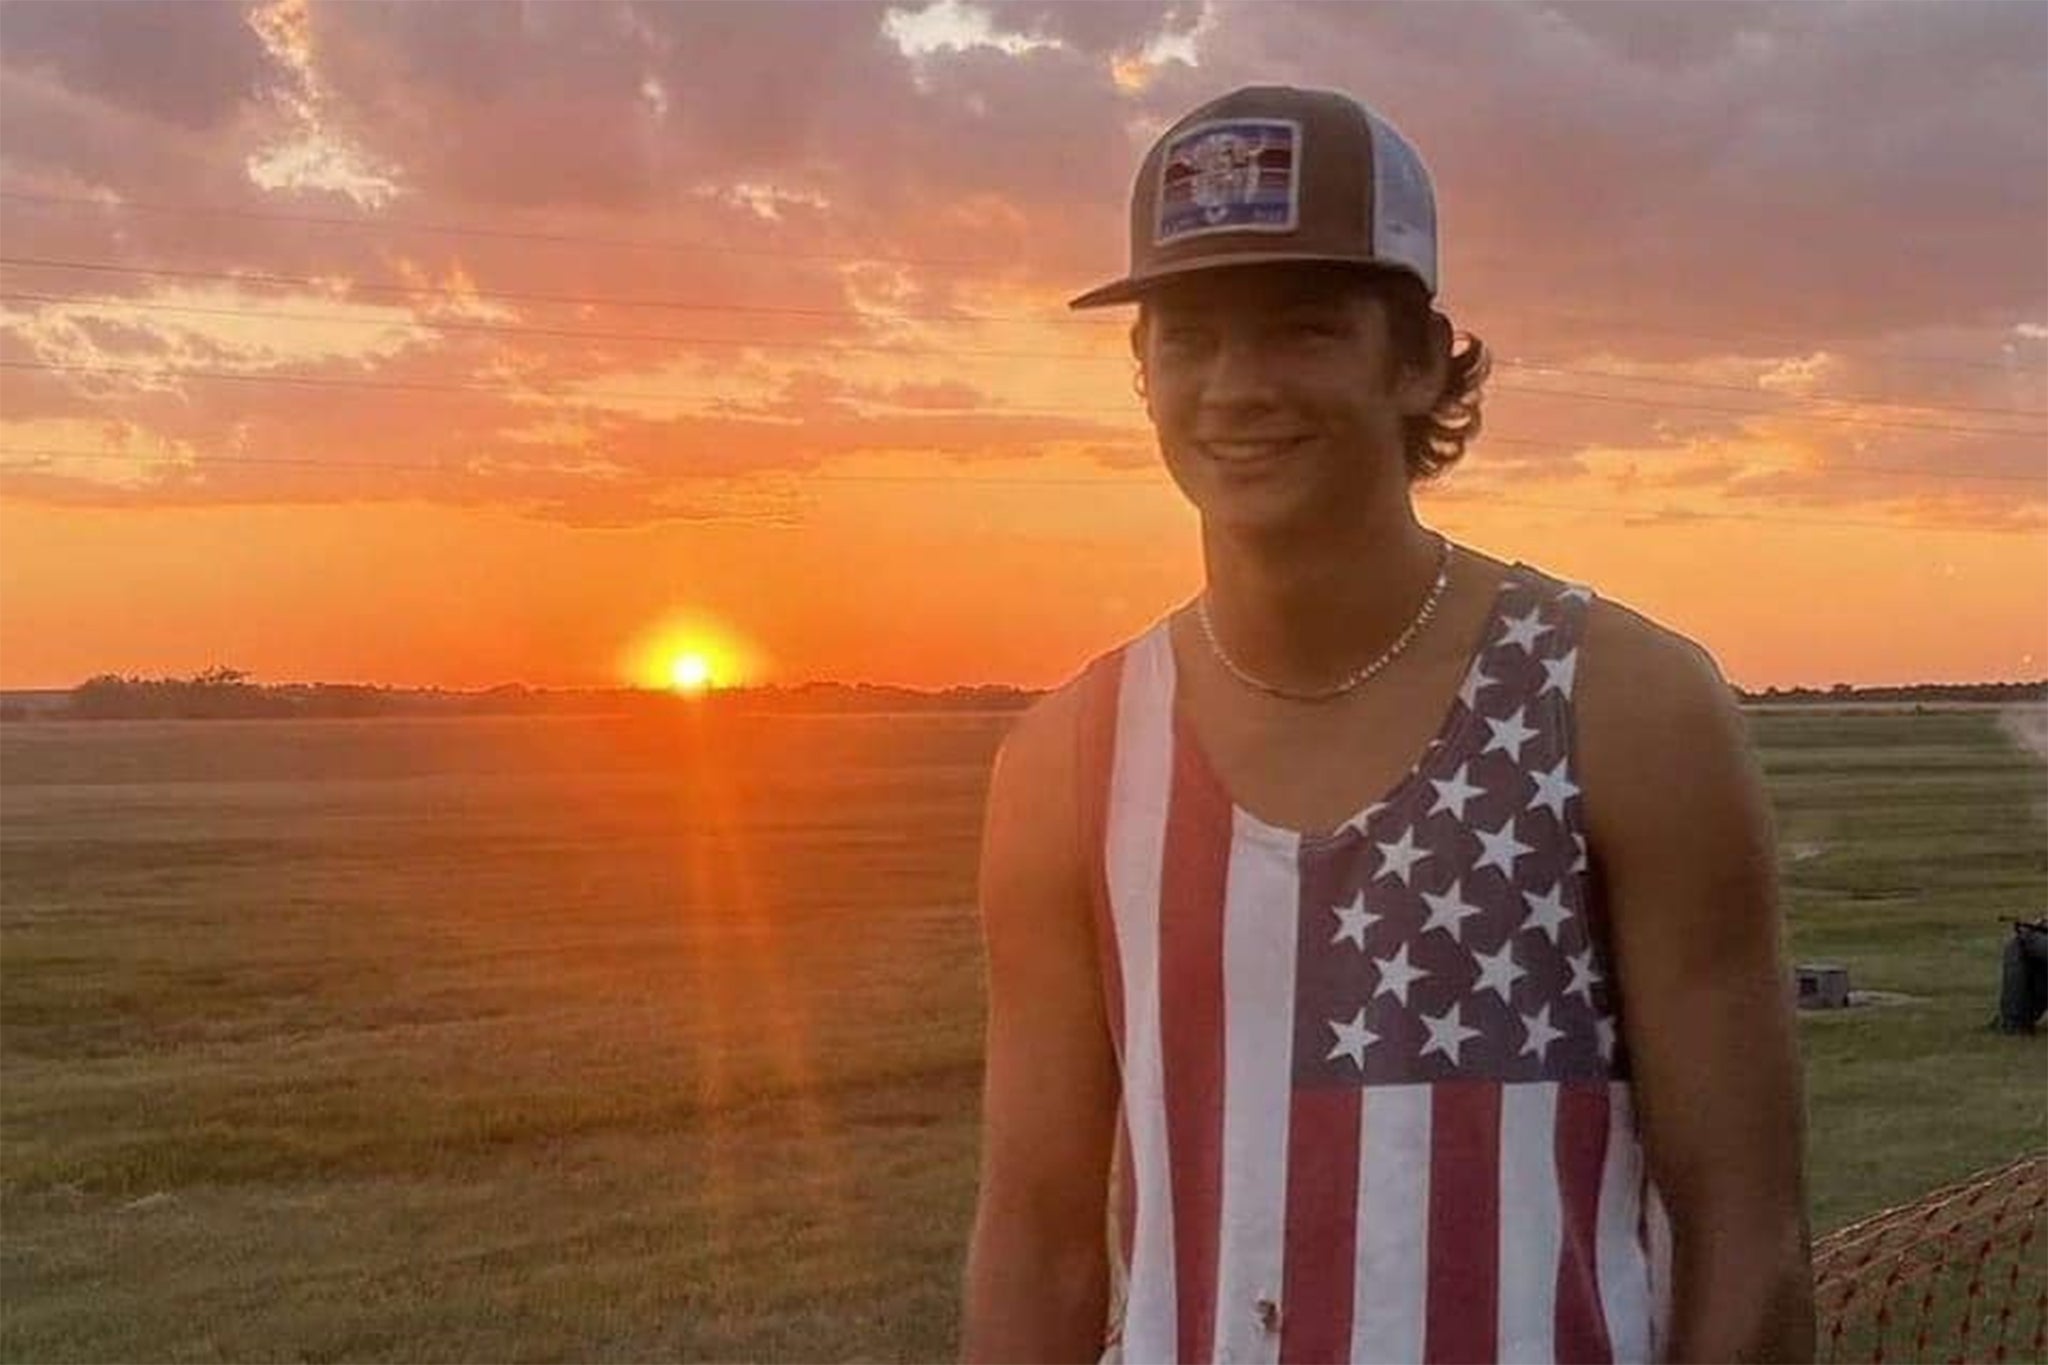 Noah Presgrove, 19, vanished from a birthday party over the 2023 Labor Day weekend. His body was found about a mile away. He had a fractured skull, broken ribs, he was naked except for shoes and his teeth were scattered, his family say